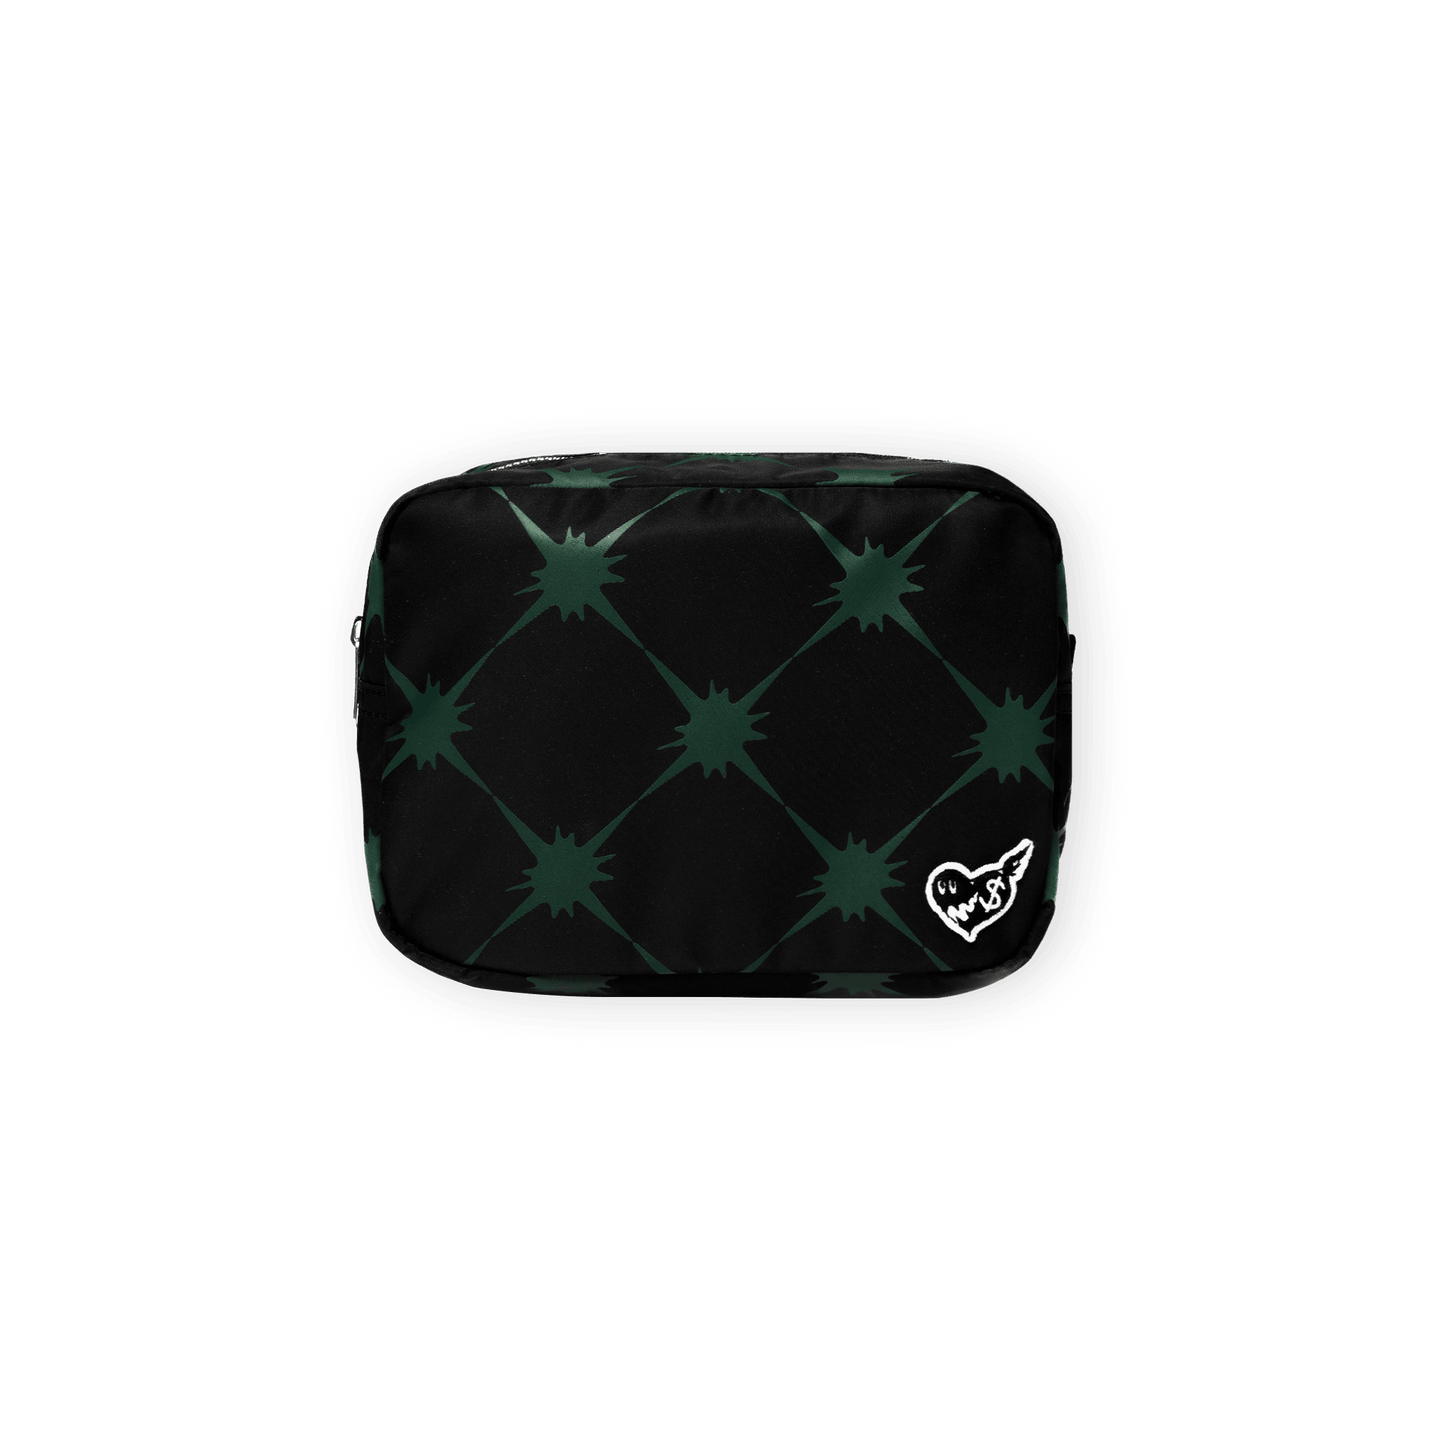 STARFIELD TRAVEL POUCH - LARGE - Billionaire Girls Club Exclusives